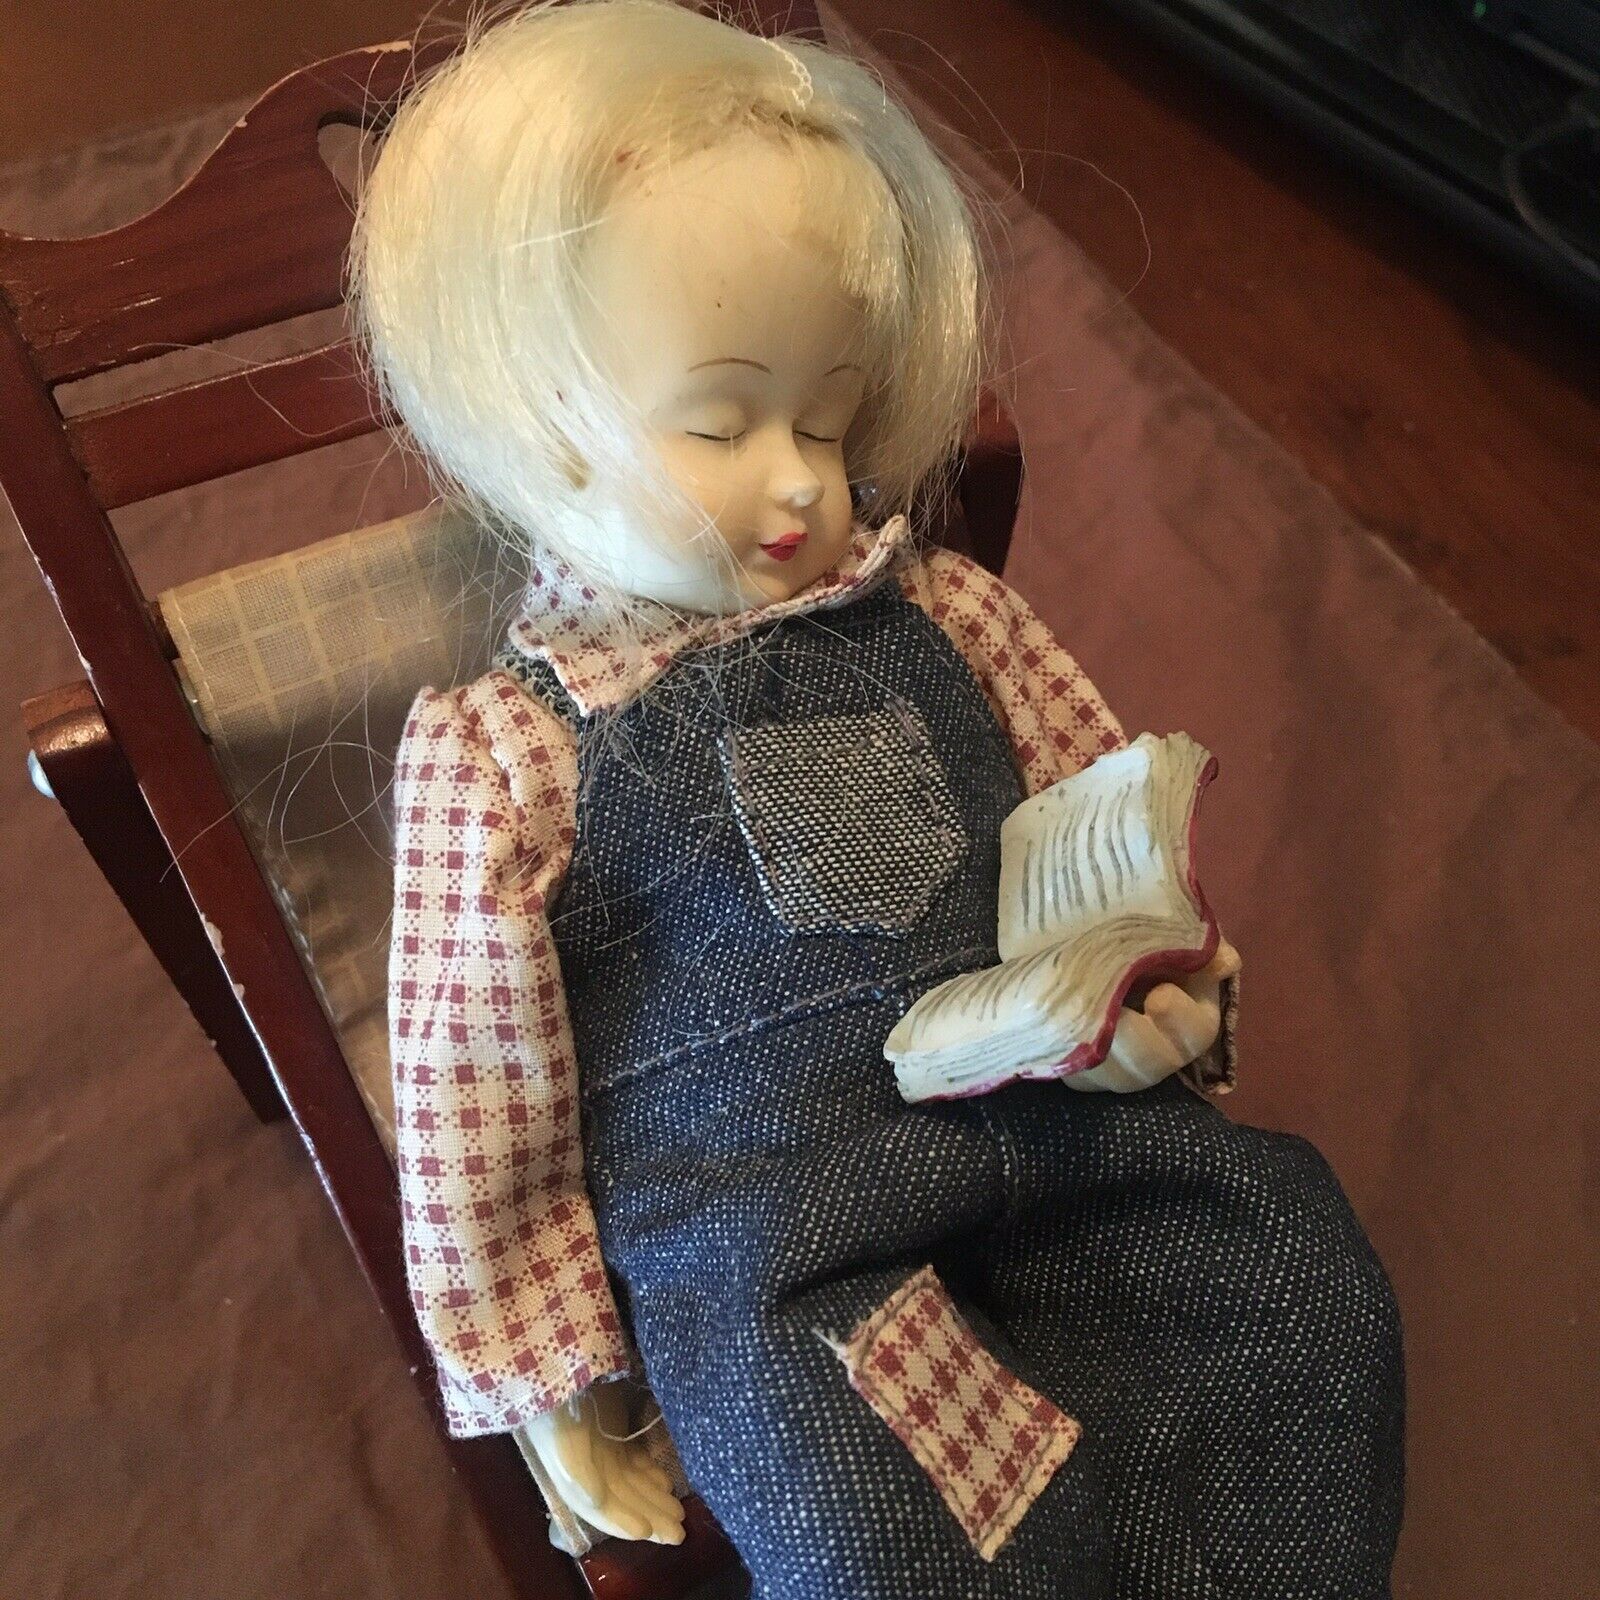 Porcelain Doll Girl In Lawn Chair With Story Book. Heavy, 8”doll.